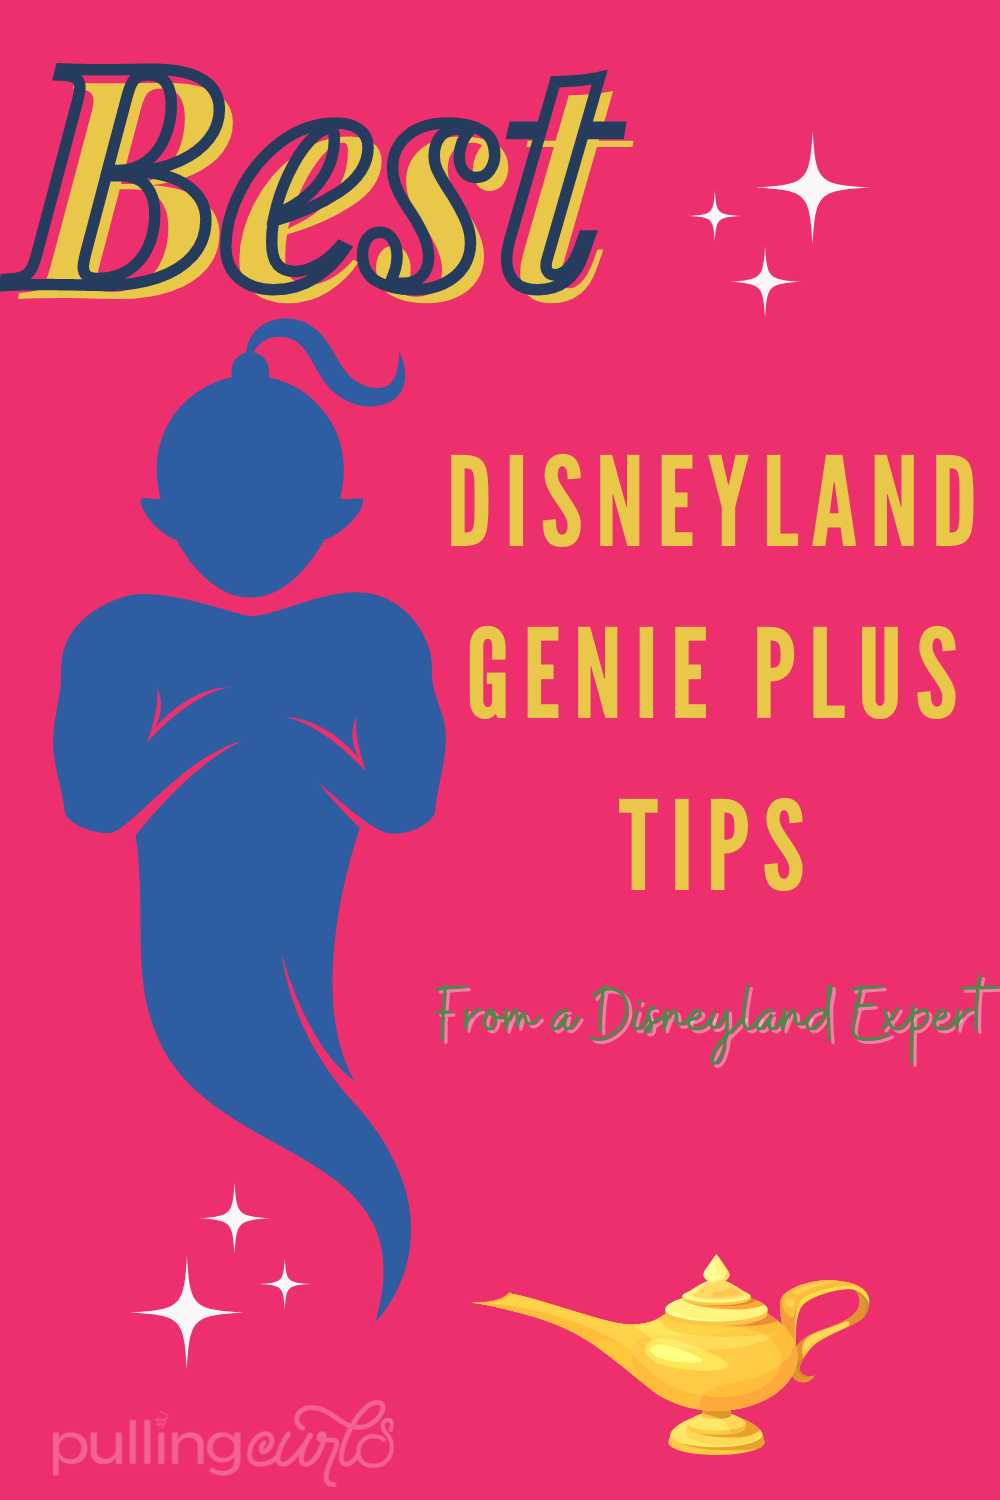 Genie Plus is a new helper at Disneyland. It is aimed to help families utilize the park better during their stay. You can also purchase Genie Plus and use it to "skip the line" using the lightening lane for a few attractions. Today we will share some tips to decide if it's right for you and to use it well if you purchase the Genie+ add-on. via @pullingcurls